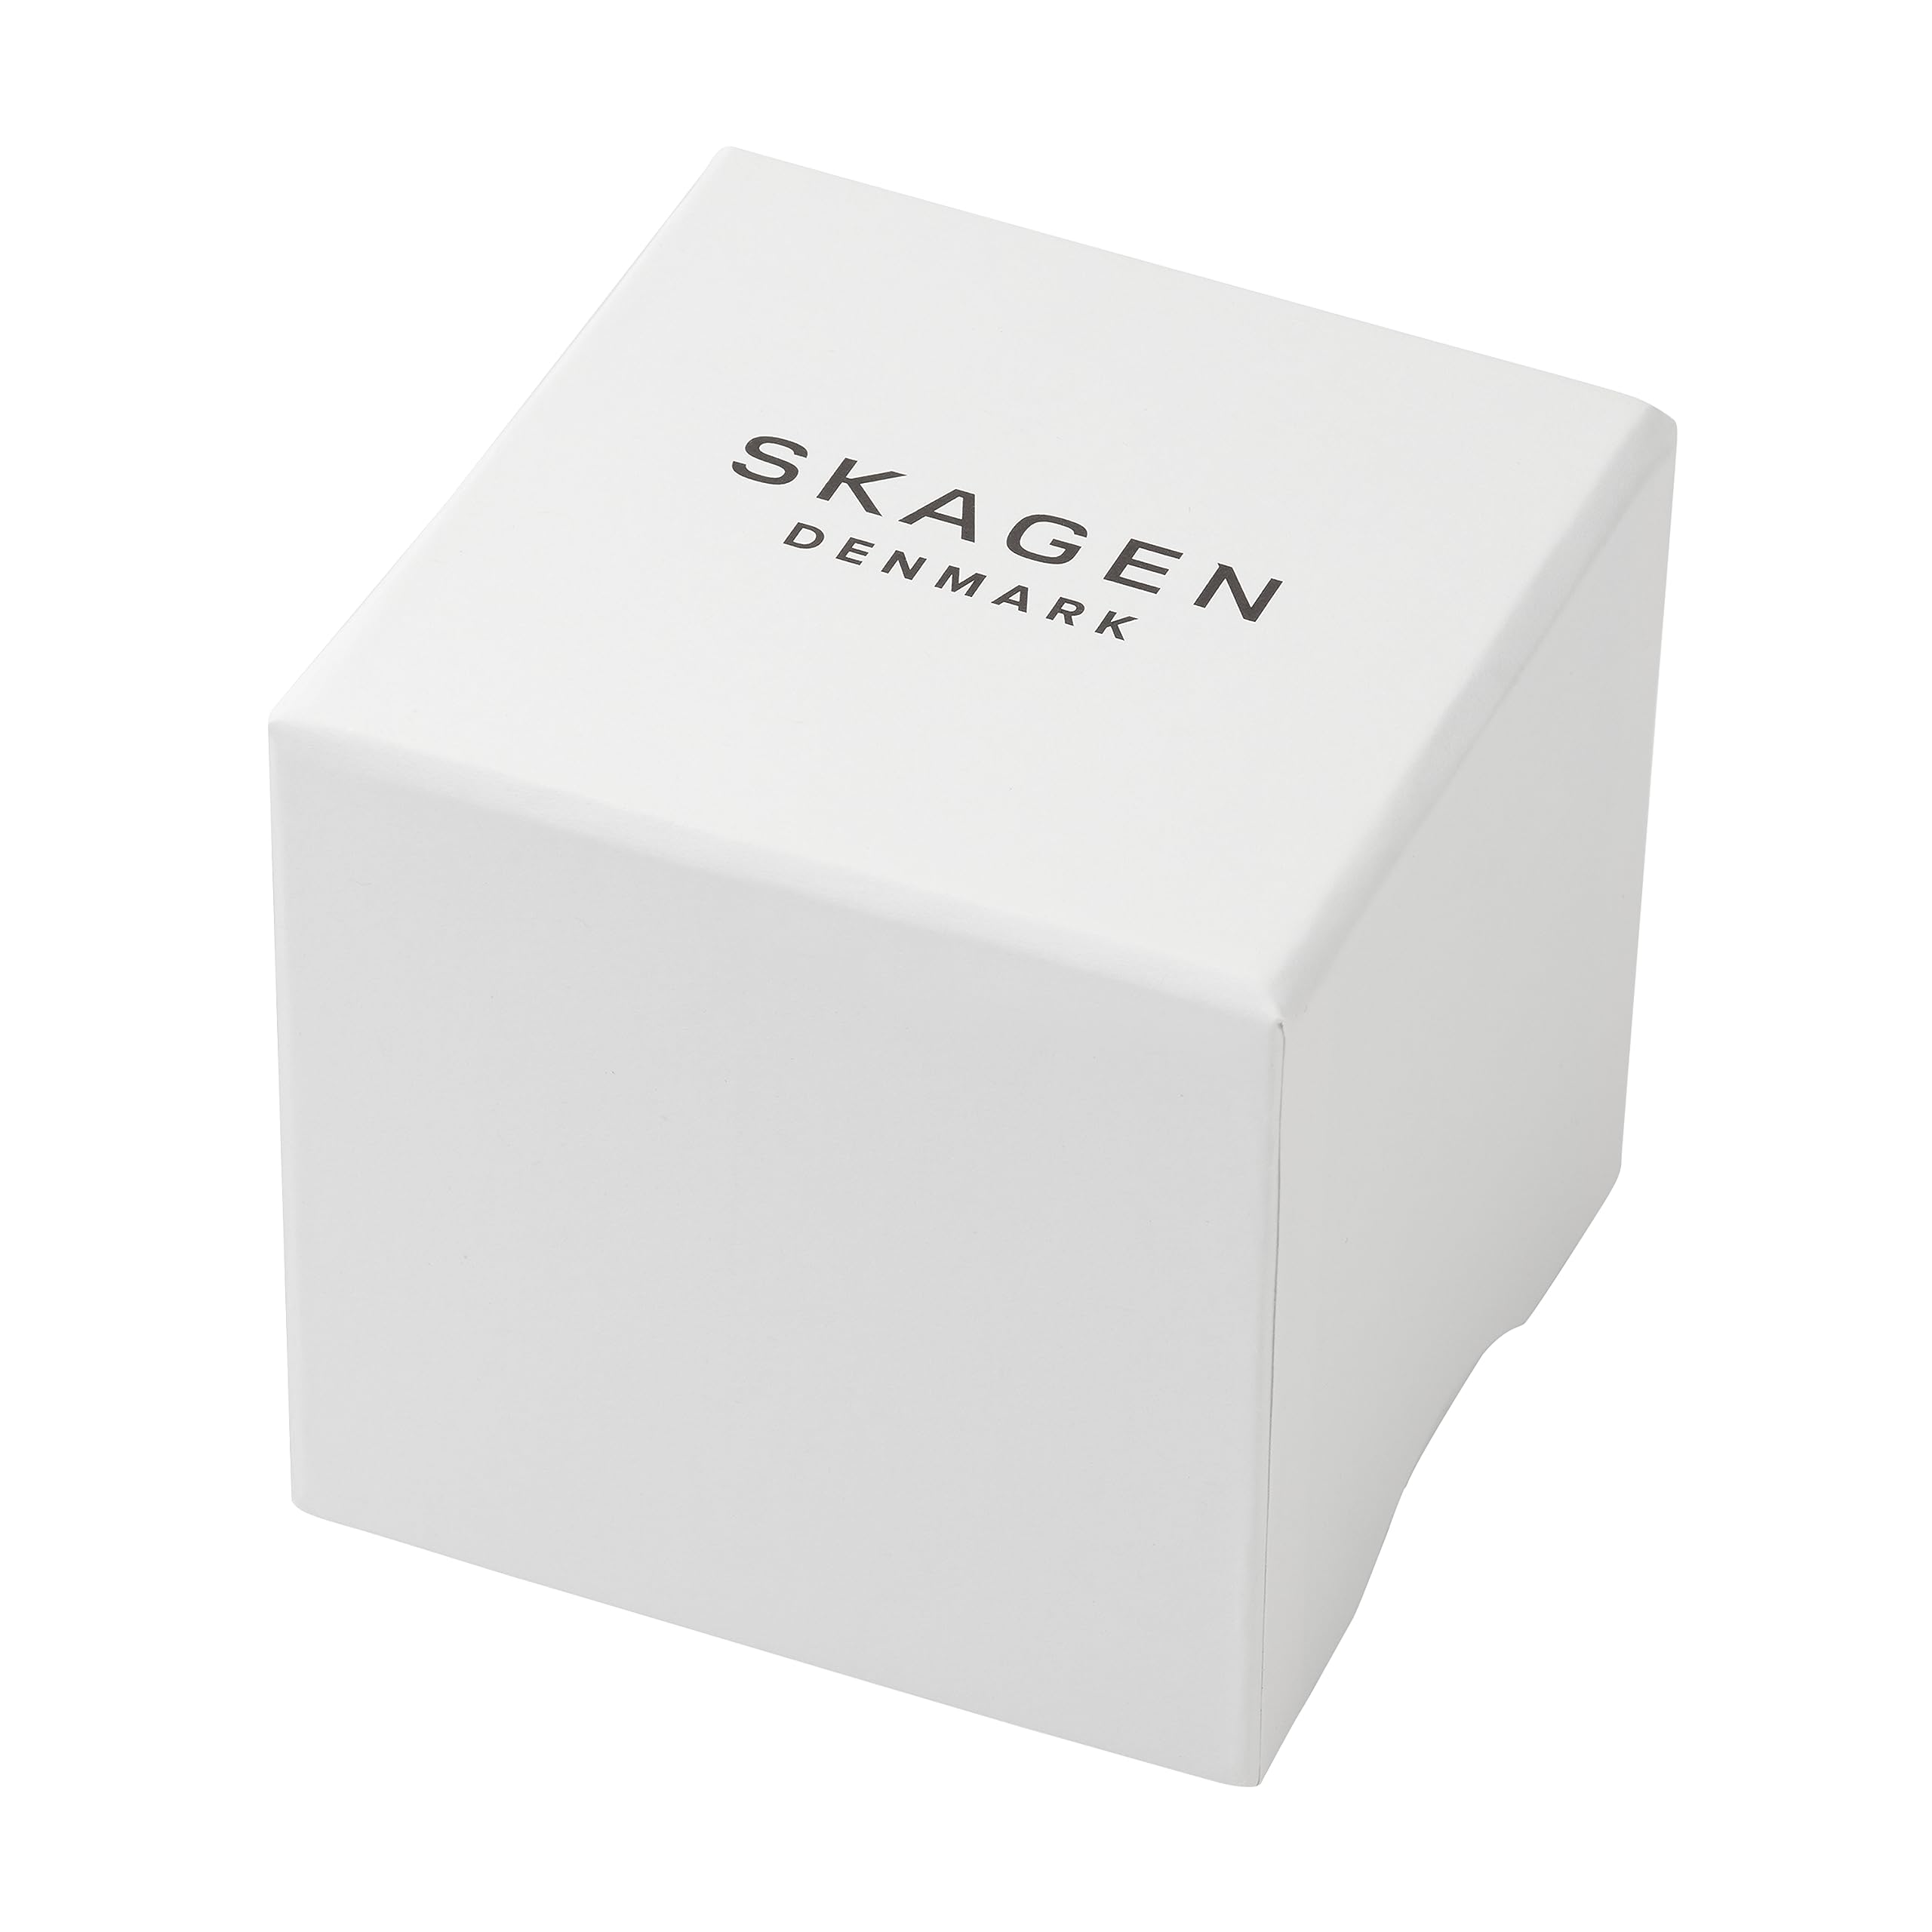 Skagen Men's Kuppel Two-Hand Sub-Second Watch with Stainless Steel Mesh or Leather Band